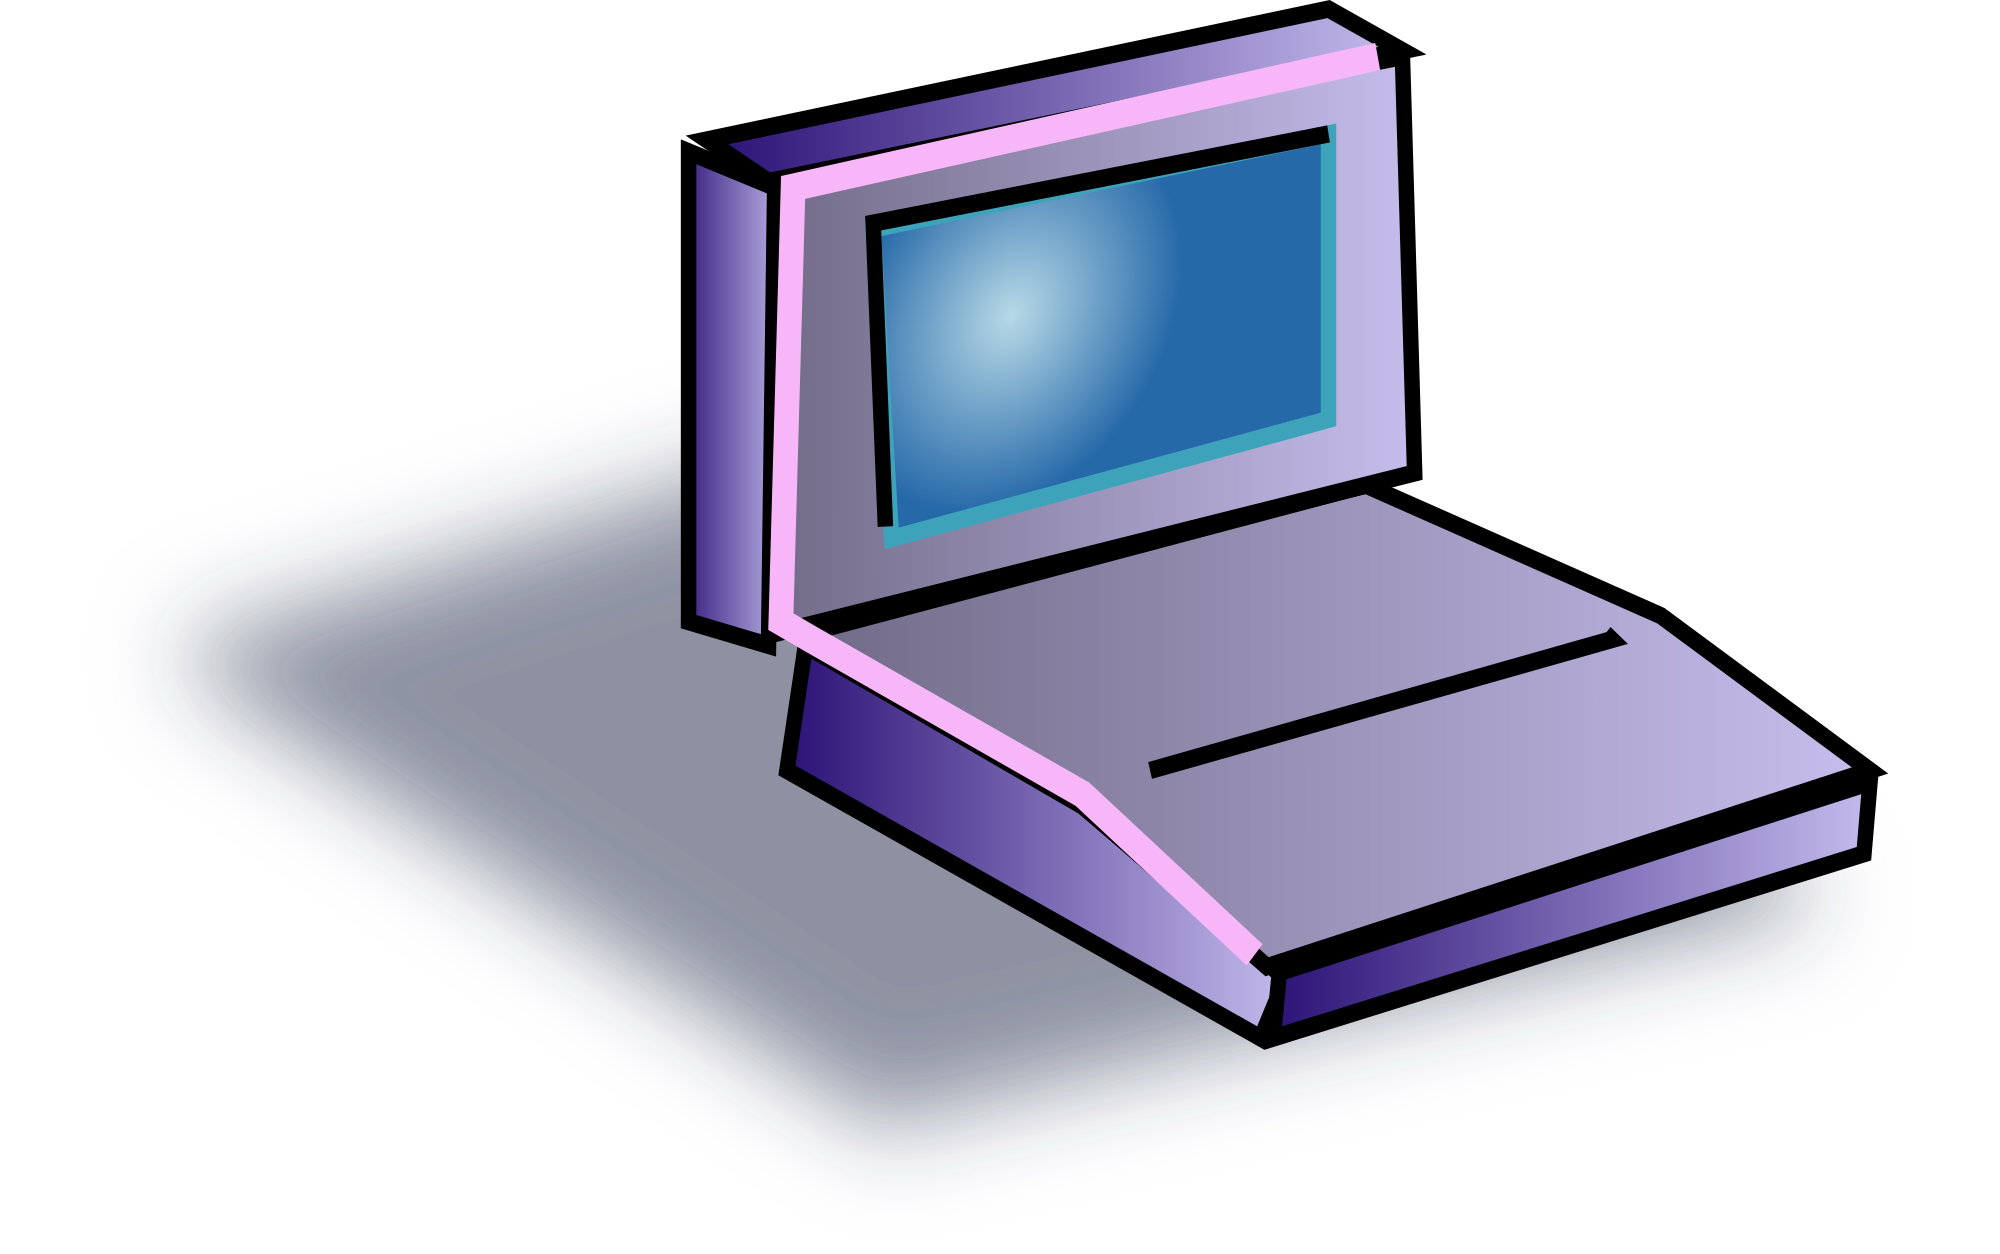 Free Csc Net Laptop And Vector Image Clipart